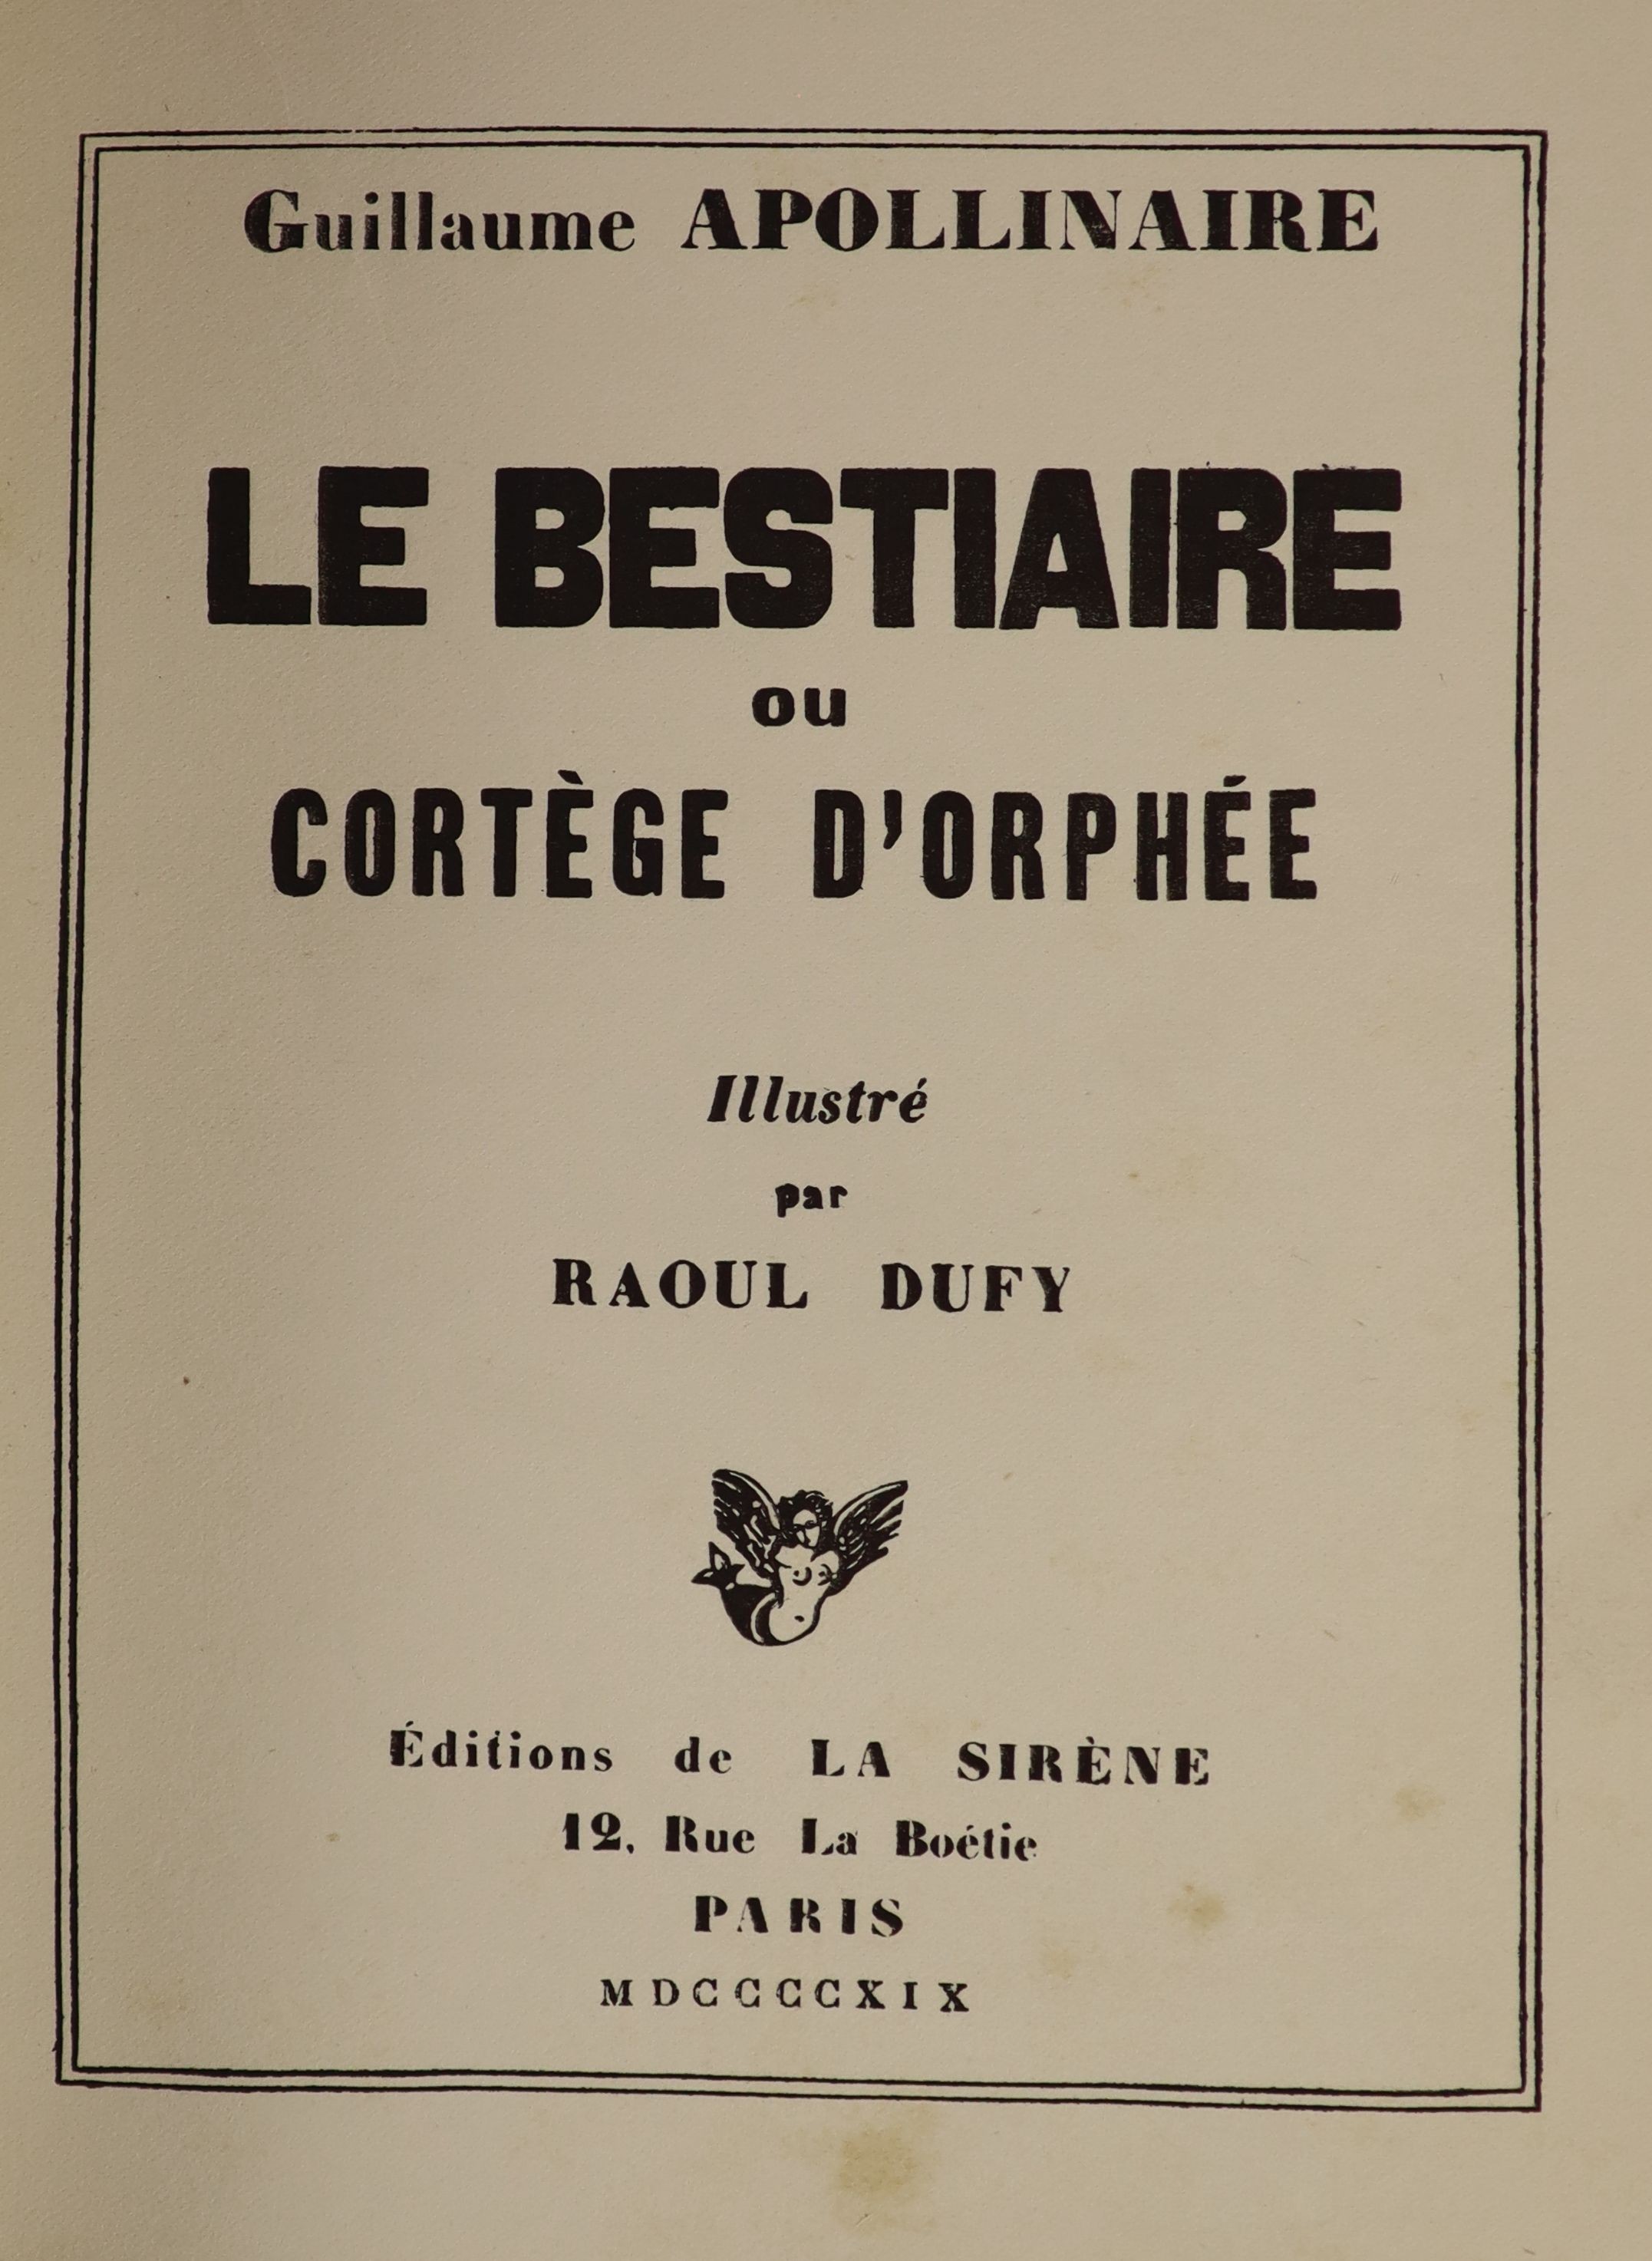 Apollinaire, Guillaume - Le Bestiaire ou cortège d’Orphee, one of 1250, illustrated with 32 wood engravings by Raoul Dufy, original yellow wraps, Paris, 1919